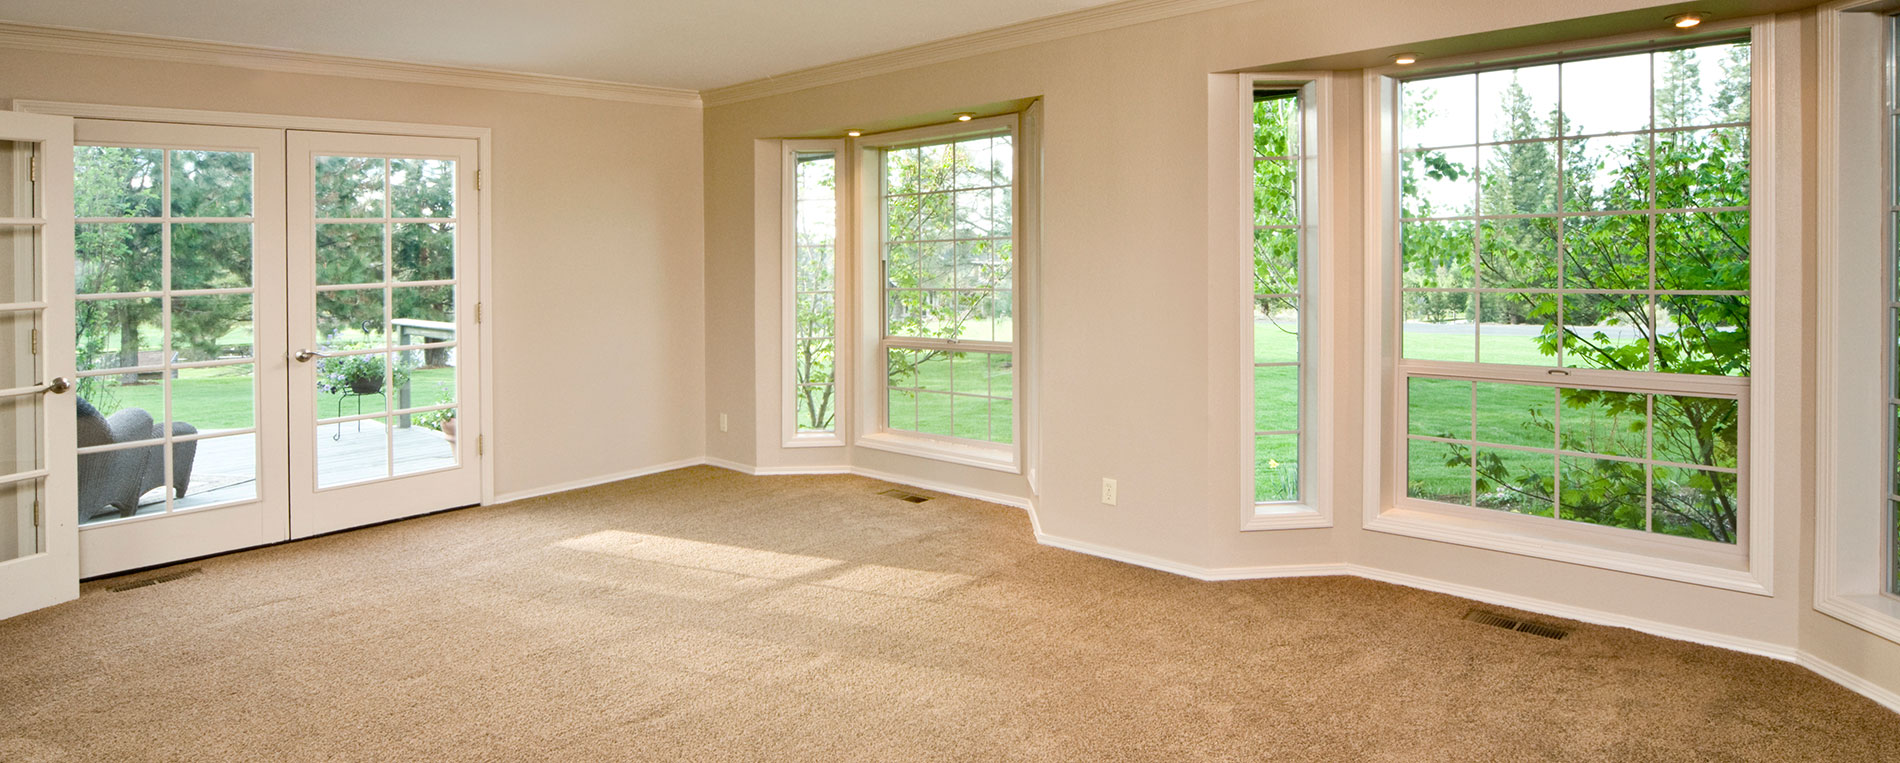 Tips to Keep Carpets Fresh and Clean Longer